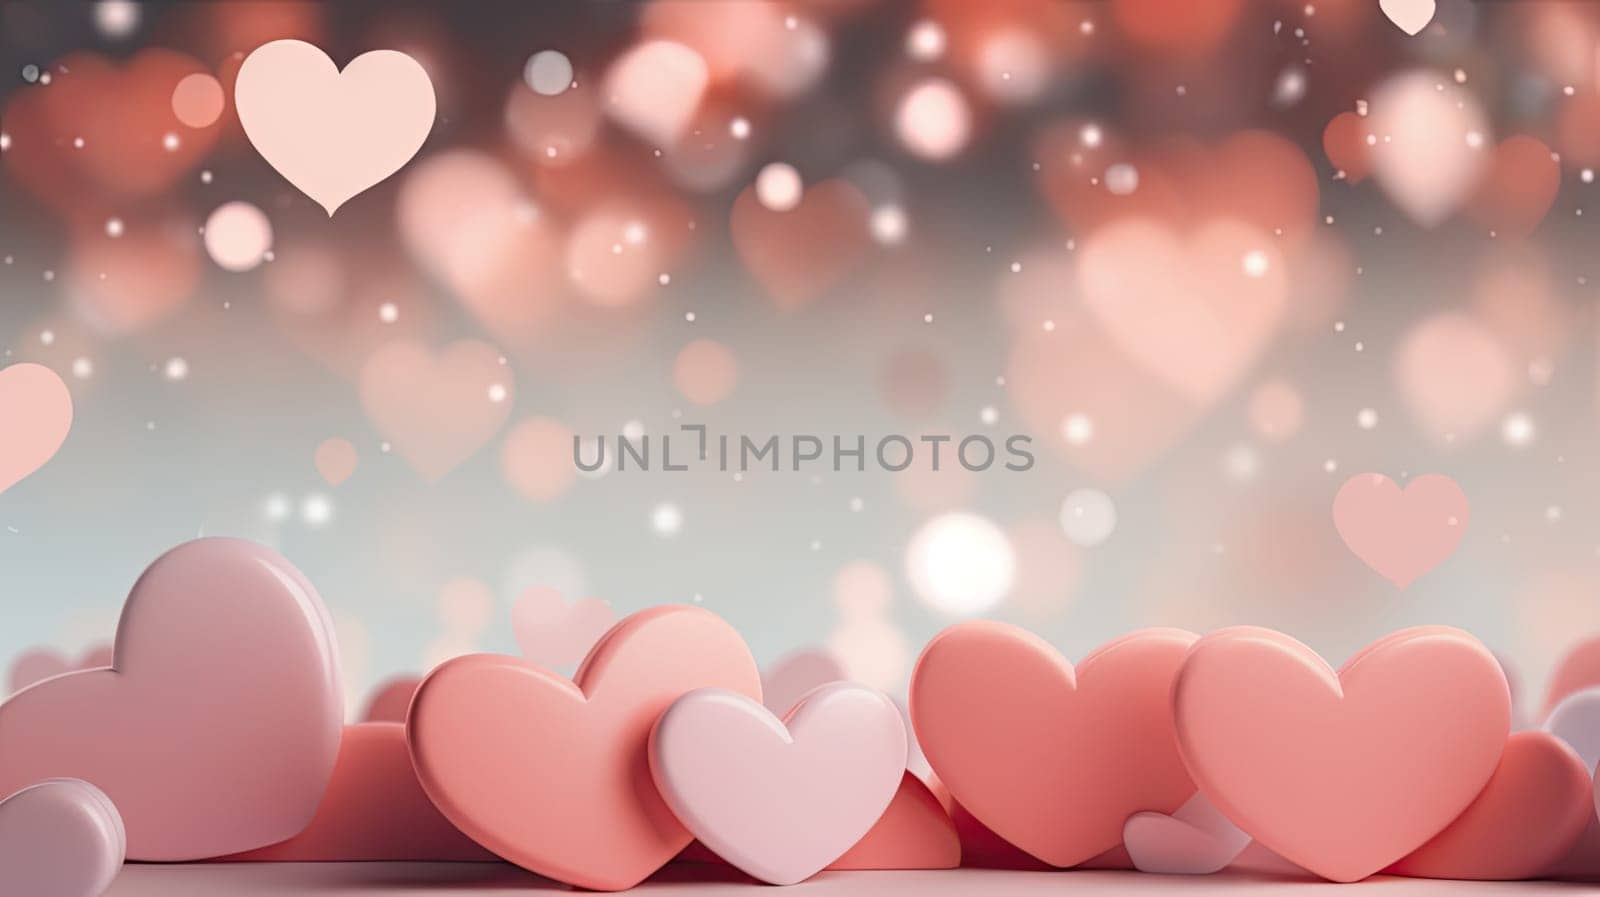 Pink hearts on different tones with blurred background and copy space. Love and san valentine concept